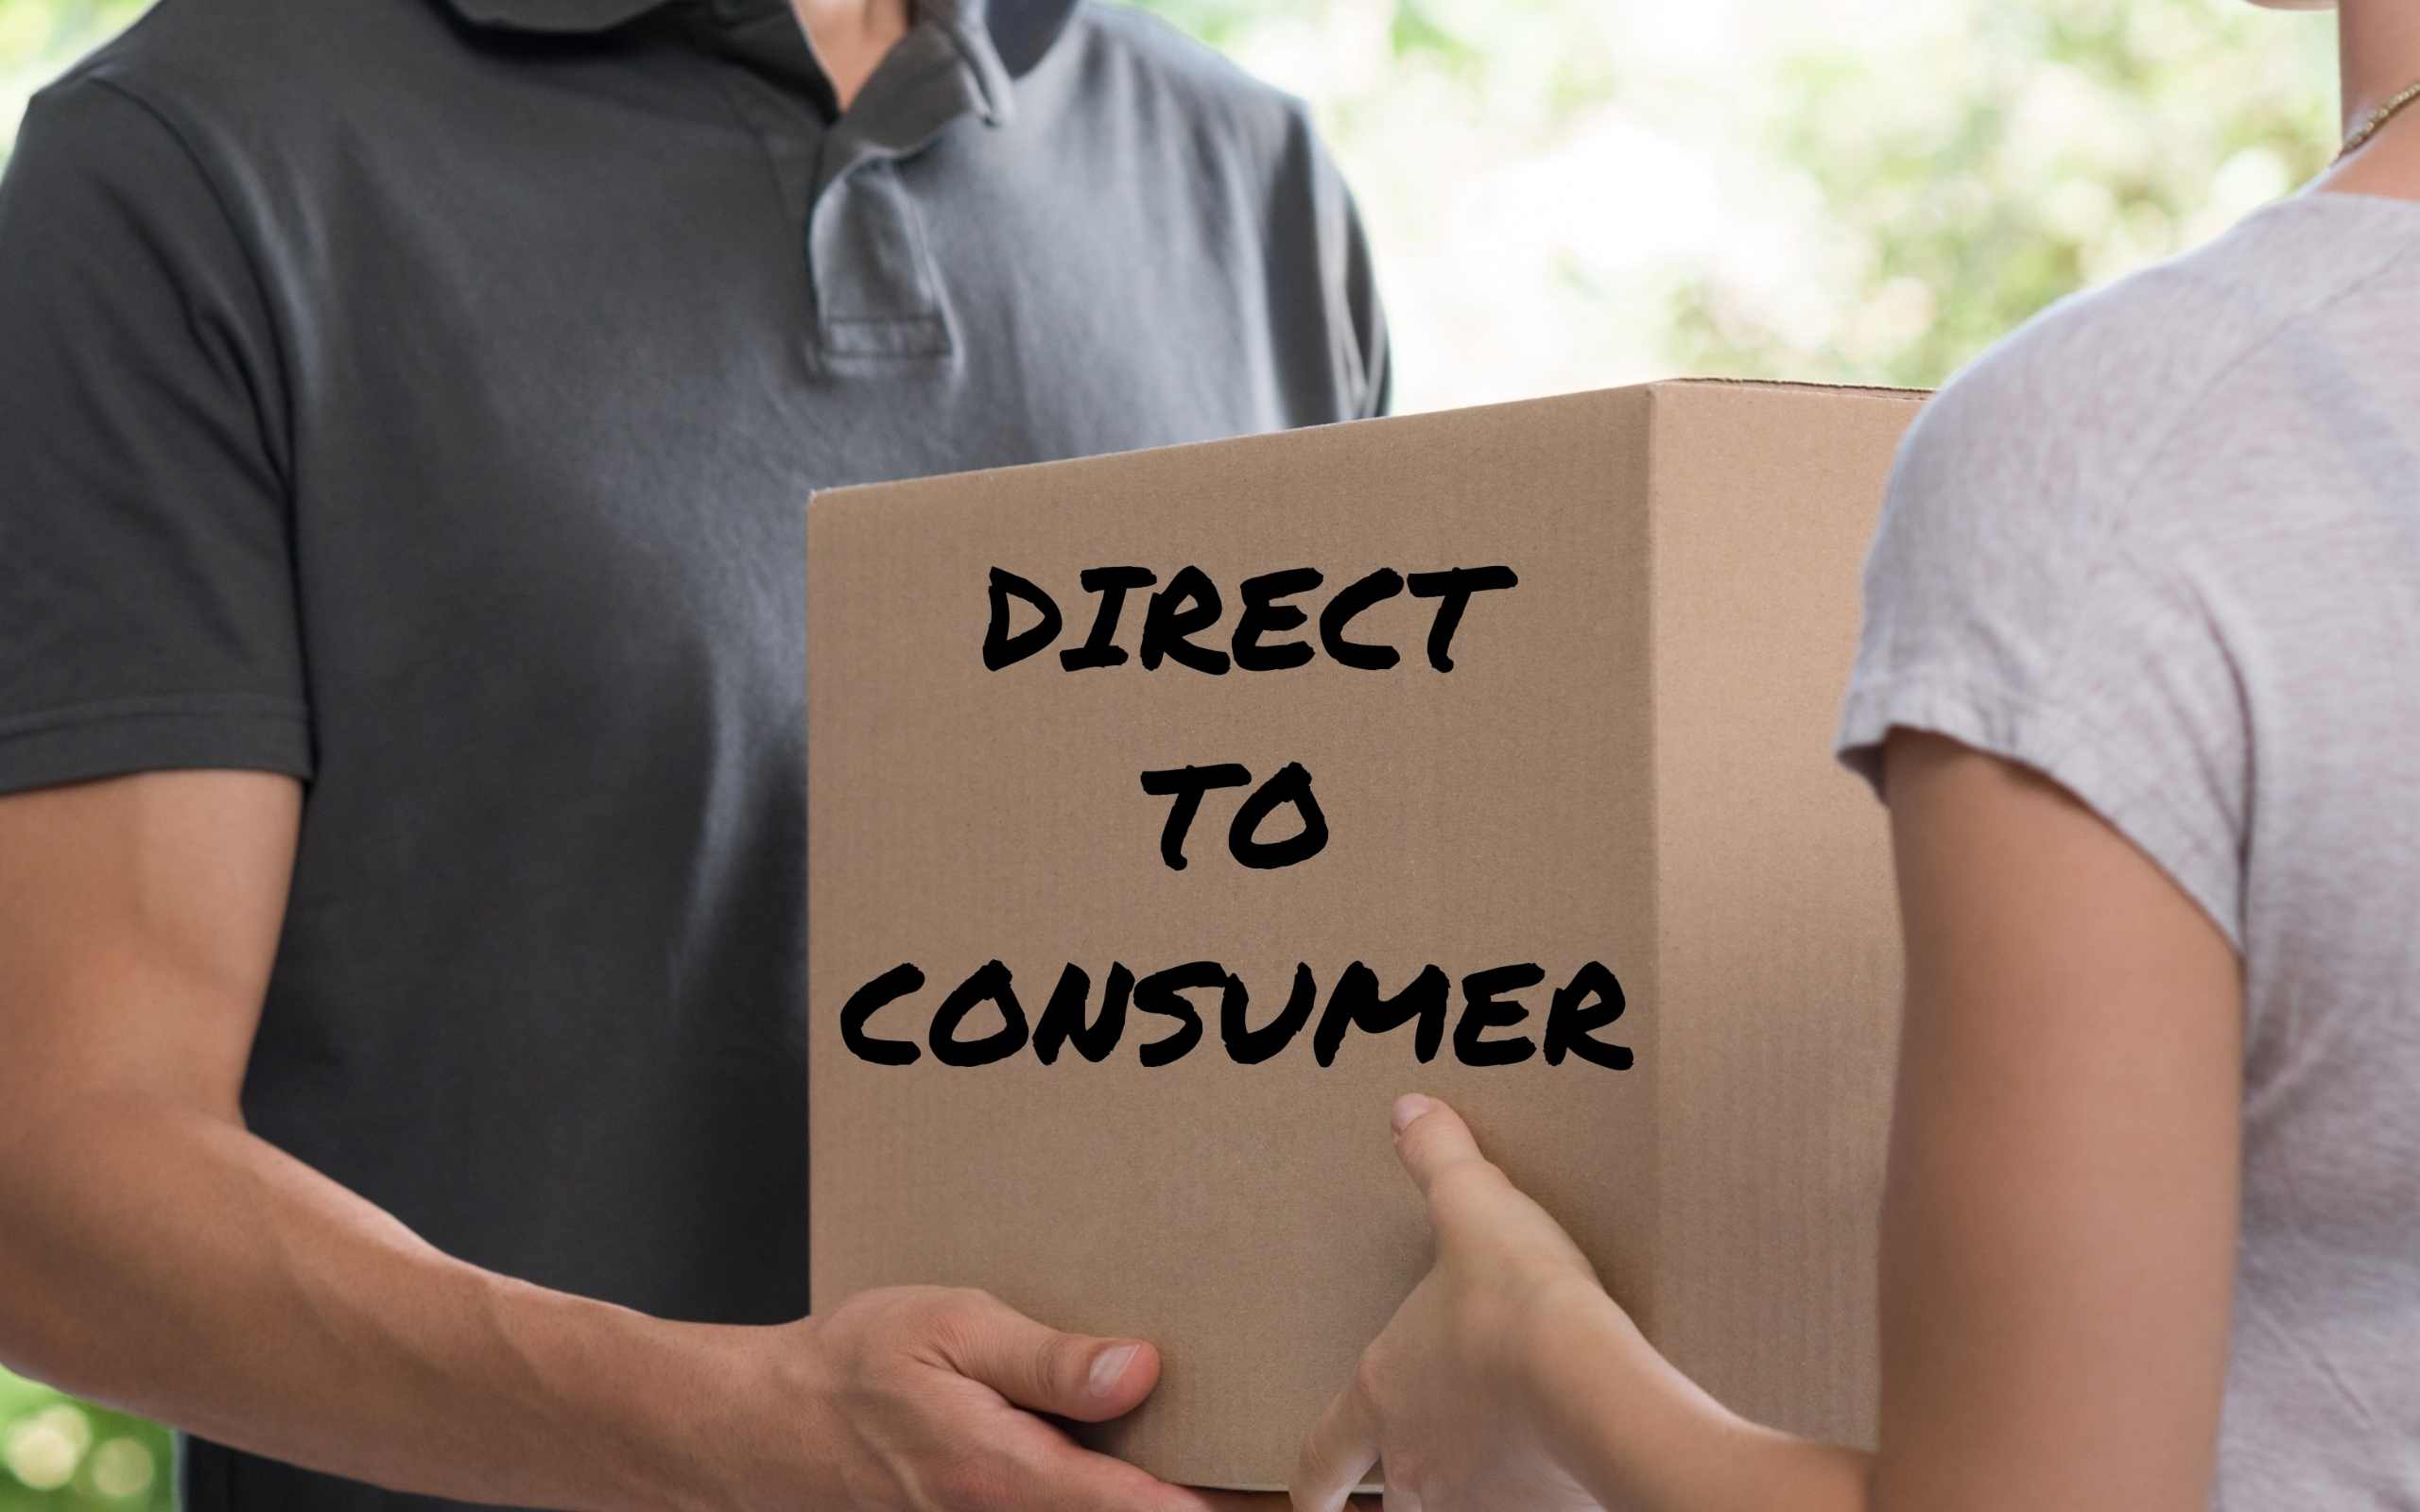 Direct to Consumer